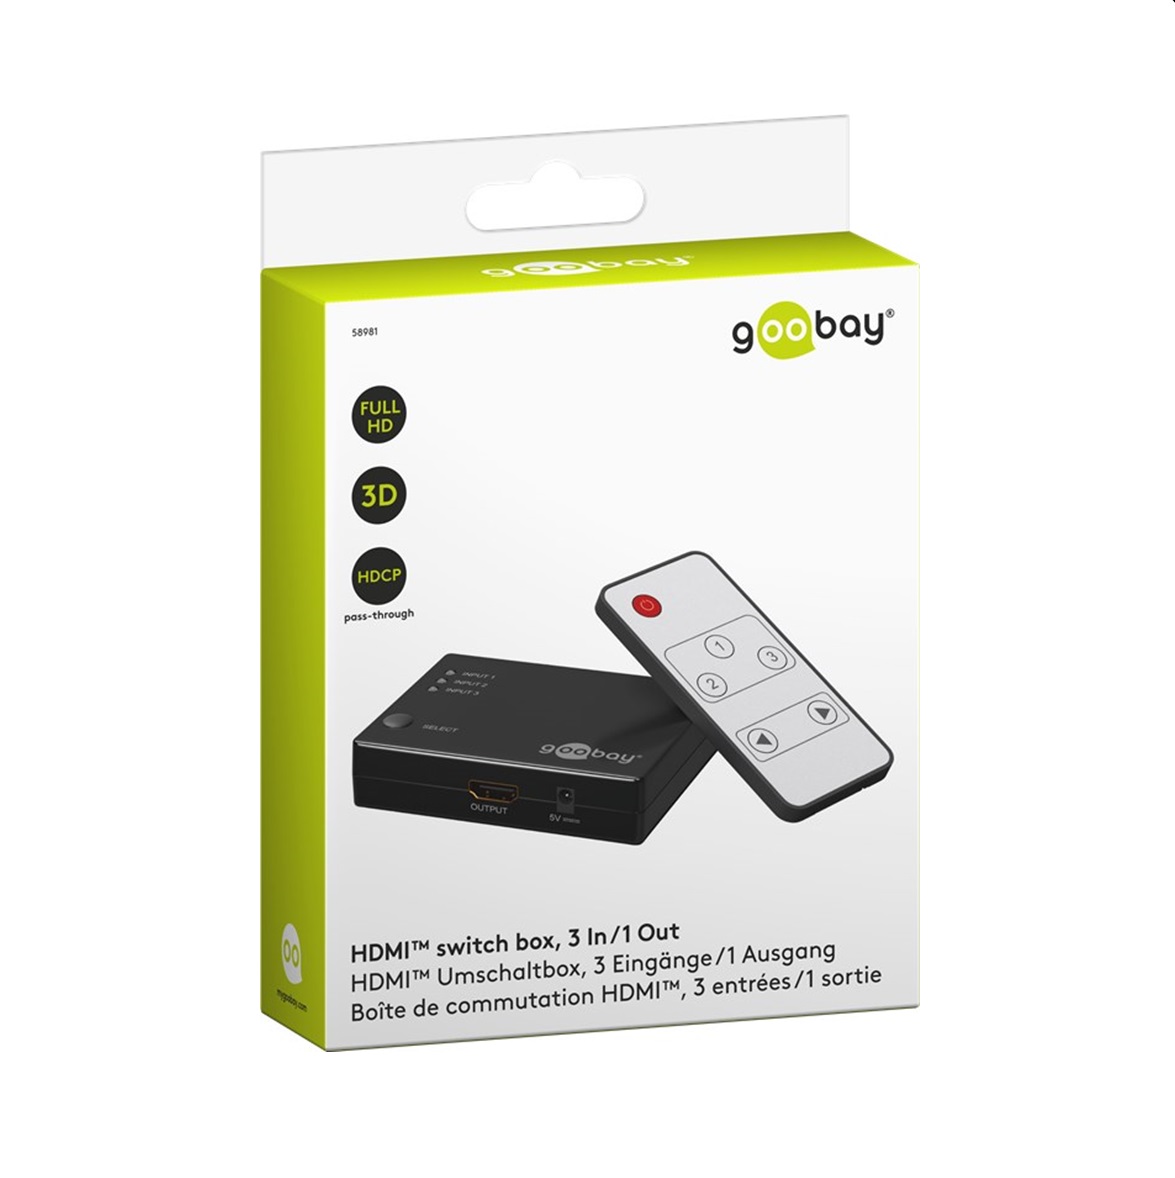 HDMI v1.4 switch box,3 In/1 Out Full HD GOOBAY